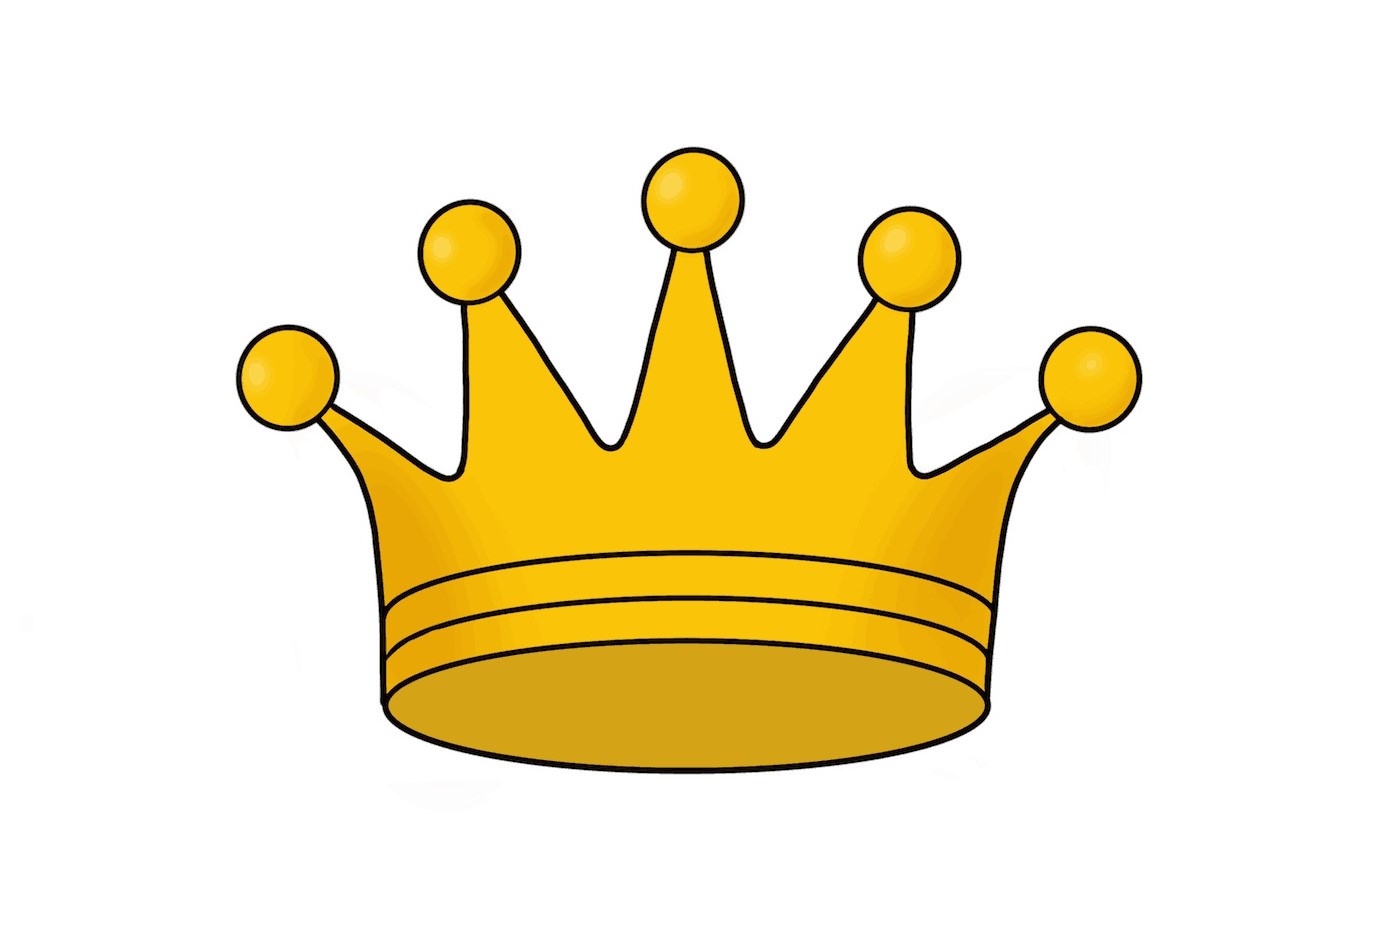 How To Draw A Crown